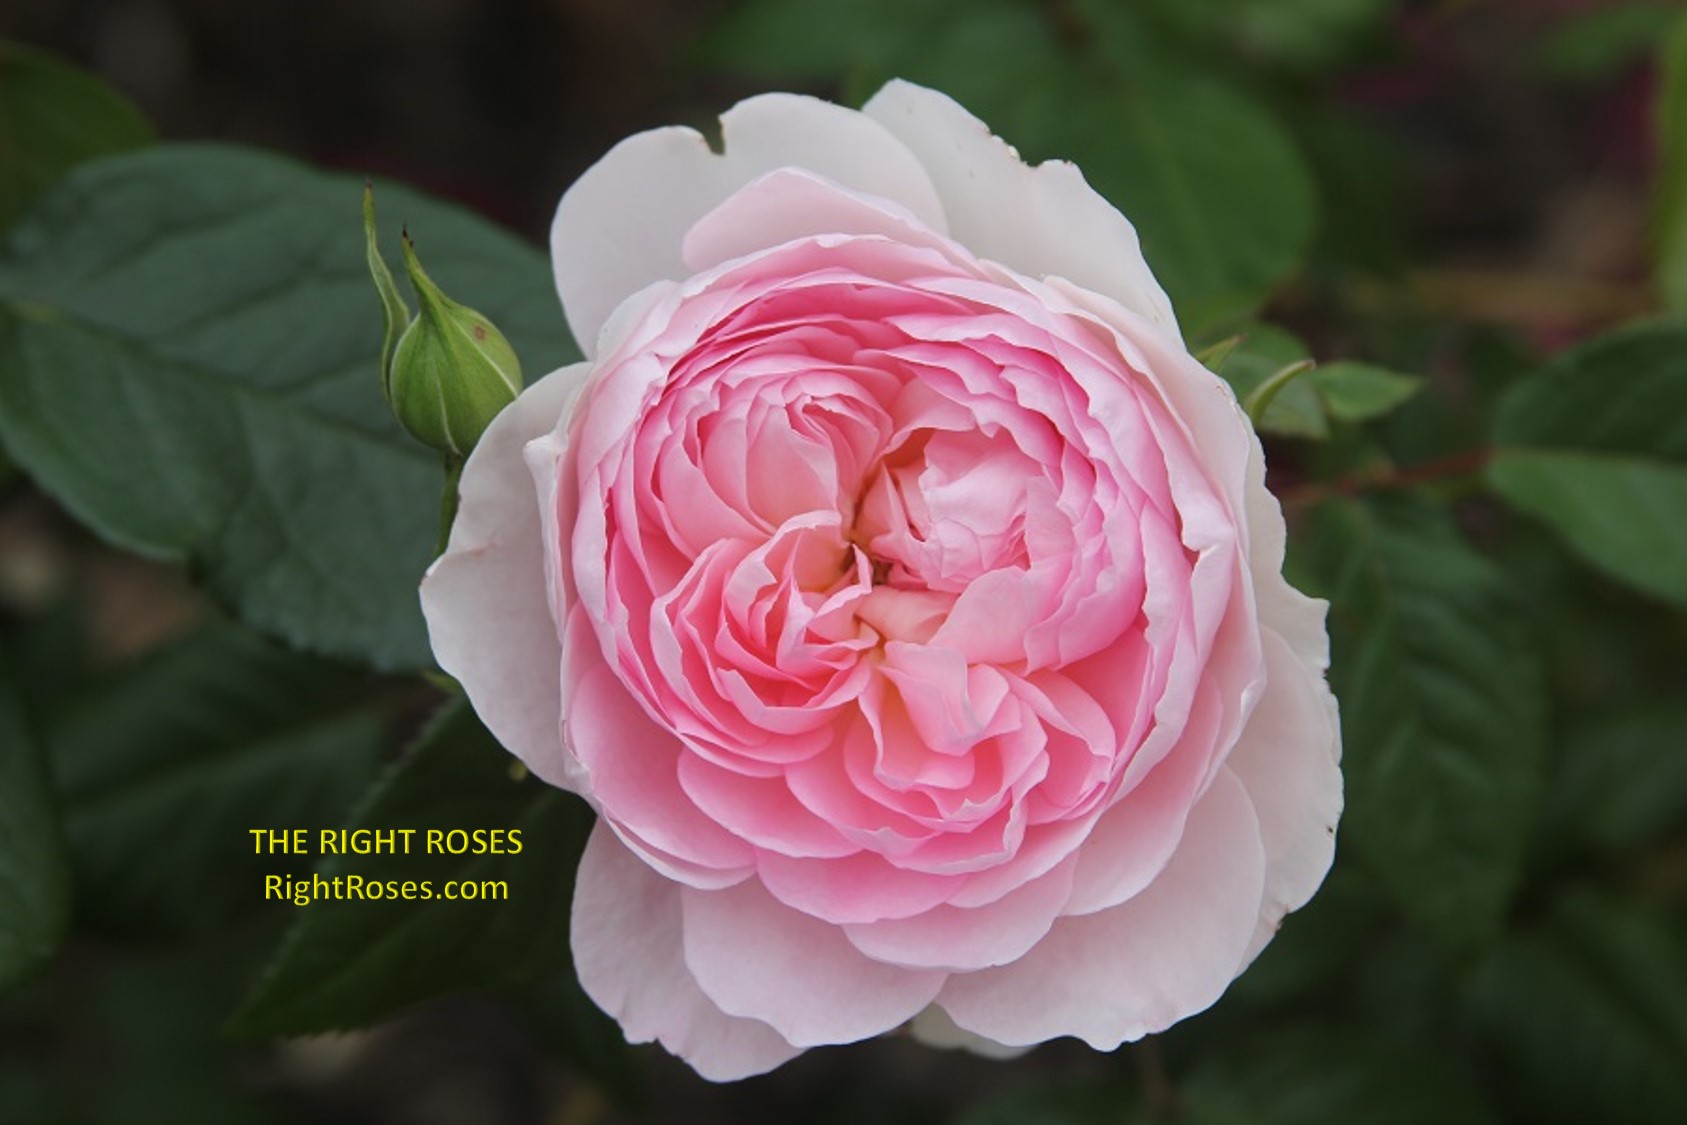 Silas Marner rose review the right roses score best top garden store david austin english roses rose products rose rating the right leap rose food fertilizer